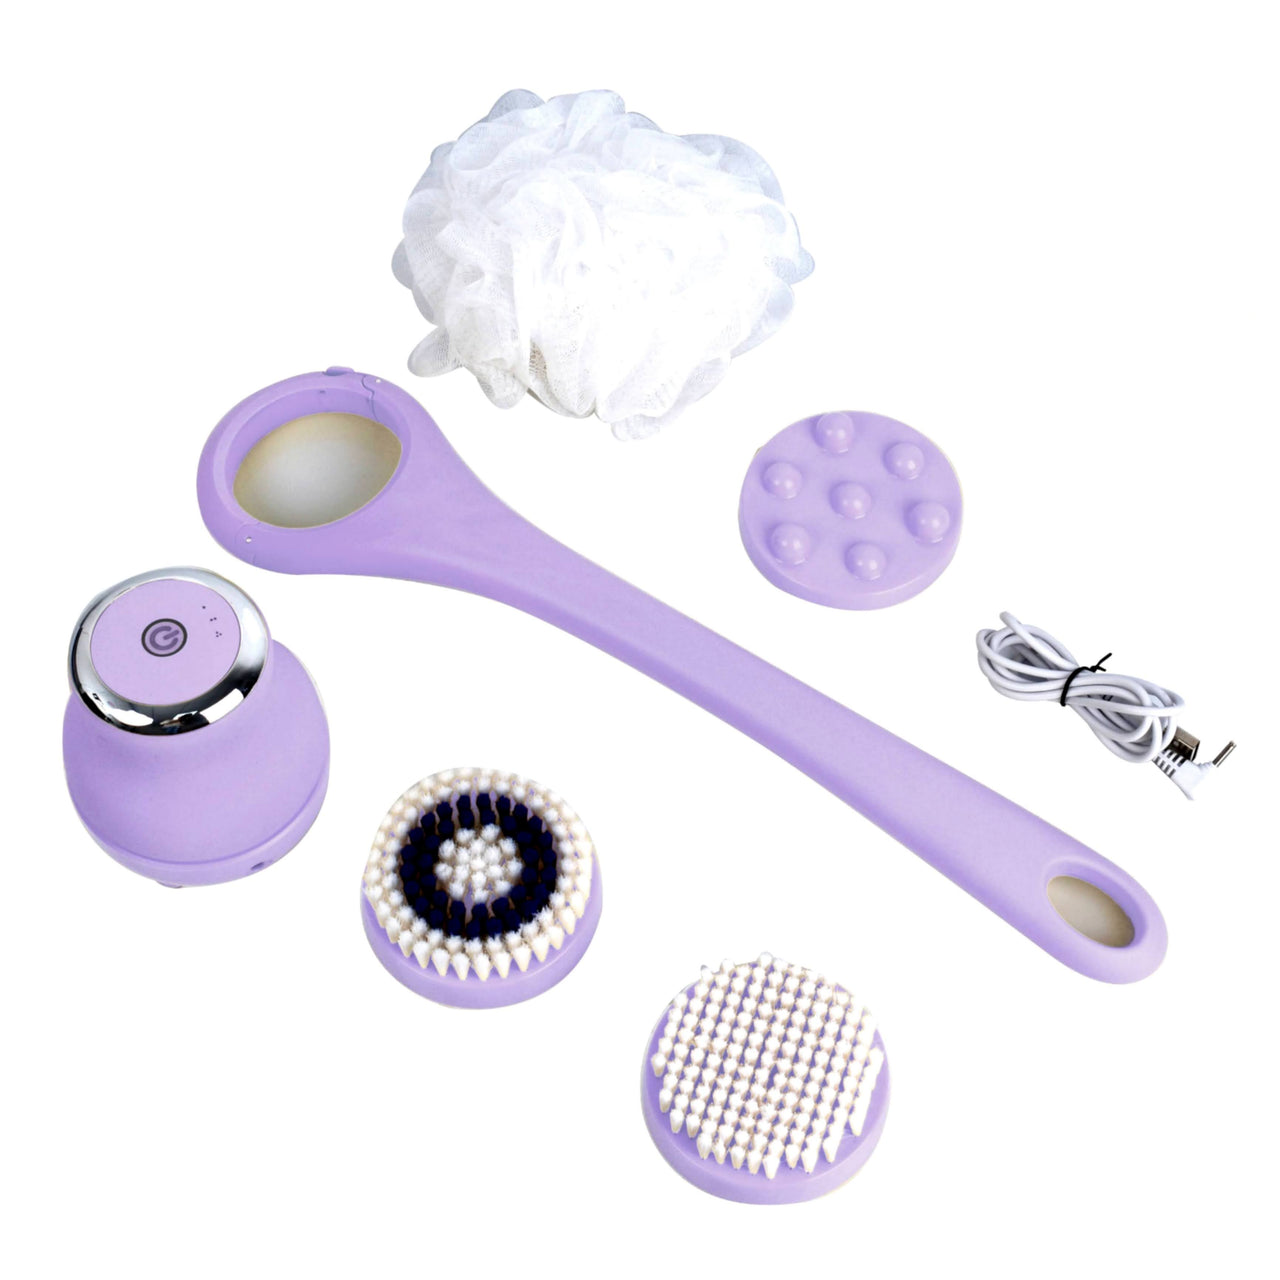 Wireless Waterproof Cleansing and Exfoliating Body Brush Set with 3 Speed 4 Brush Heads Lavender